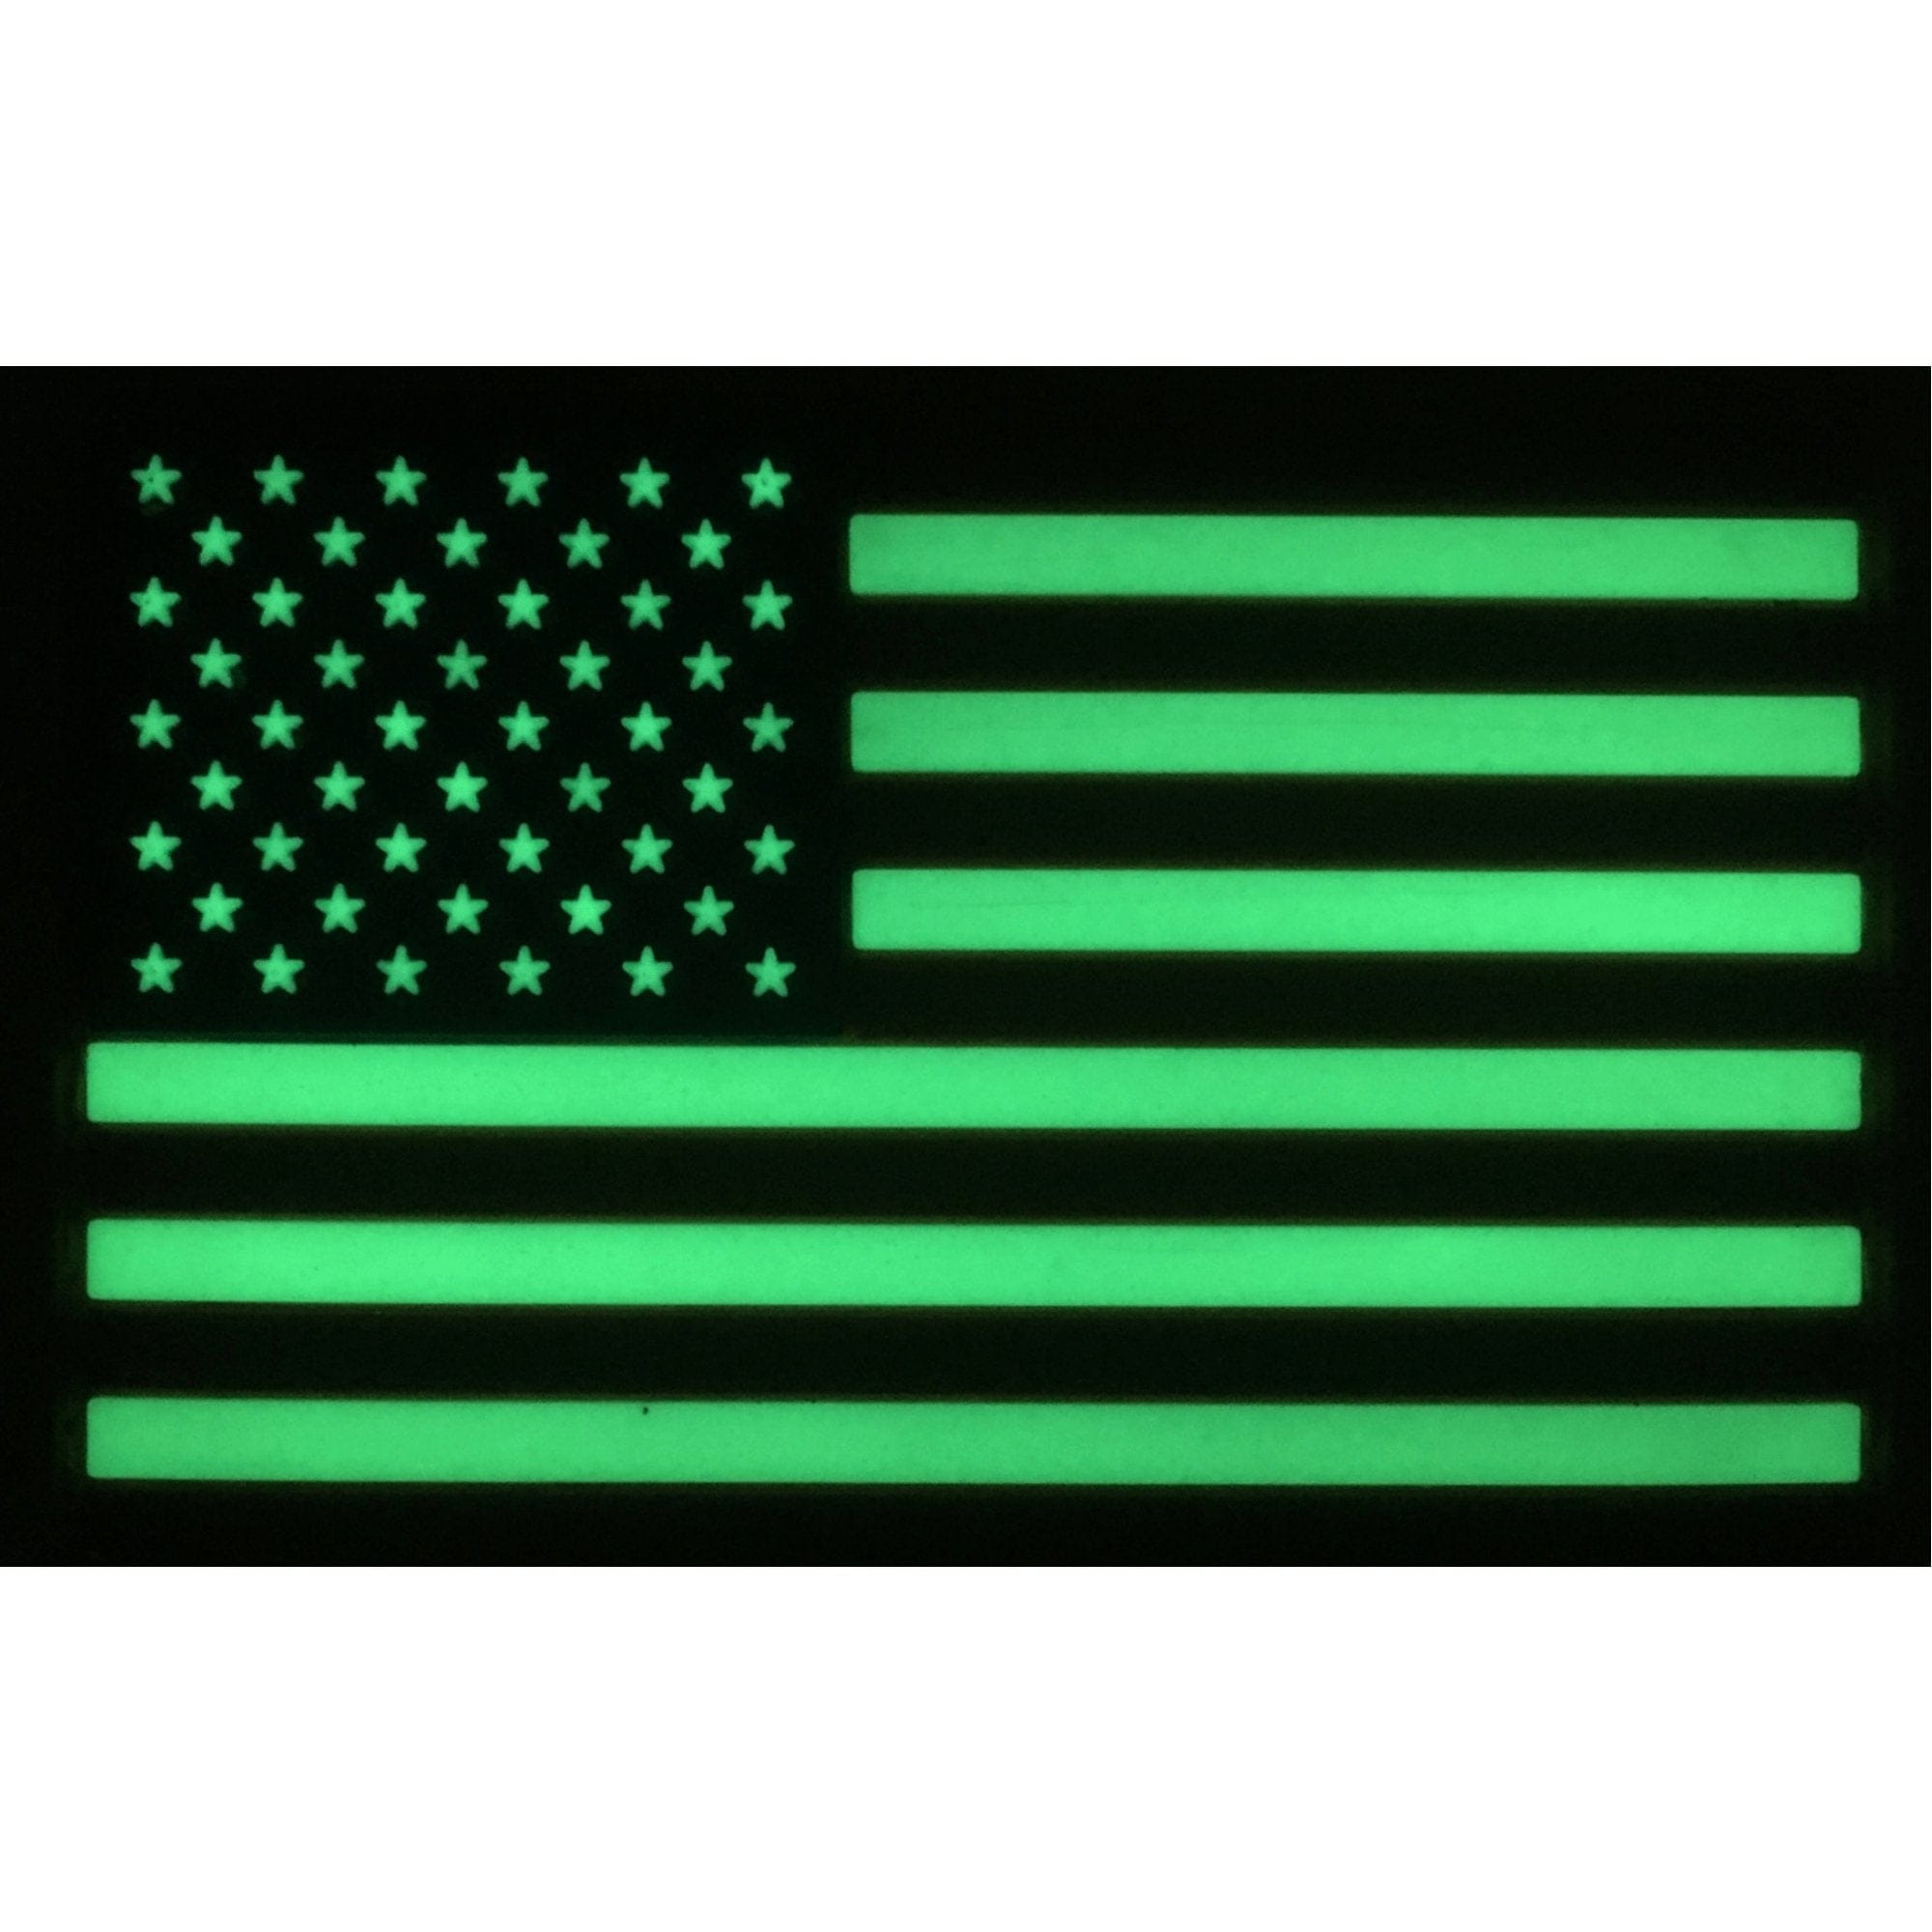 Tactical Gear Junkie Patches Glow in the Dark USA Flag Full Color - 2x3 PVC Patch